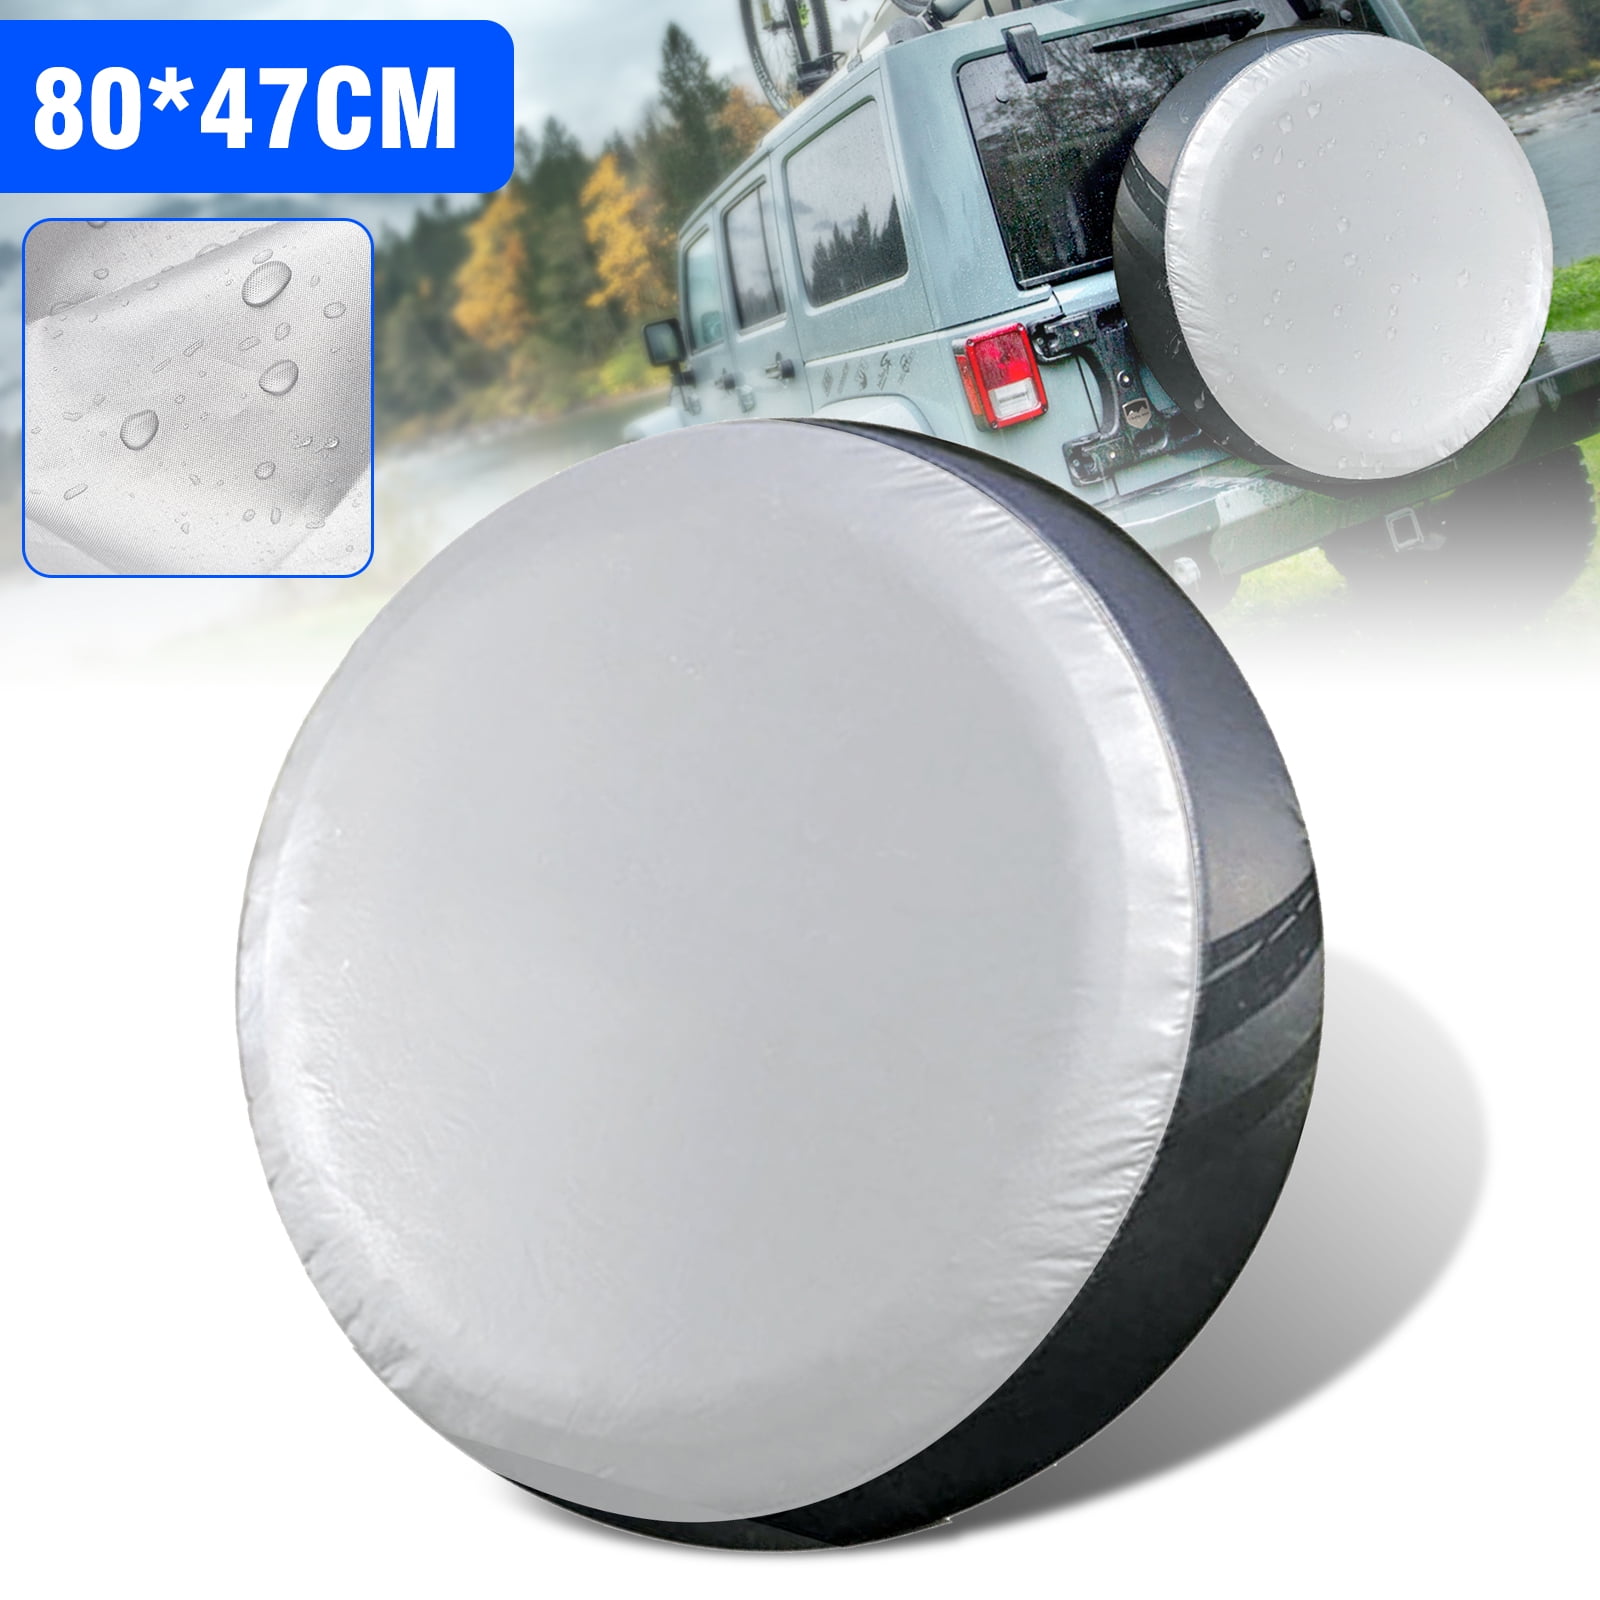 Spare Tires Cover Mountain Valley Wheel Covers Fits Boat Protection Weather-Proof Universal Rv SUV Truck Van Travel Camper Trailer Accessories 14 15 16 17 